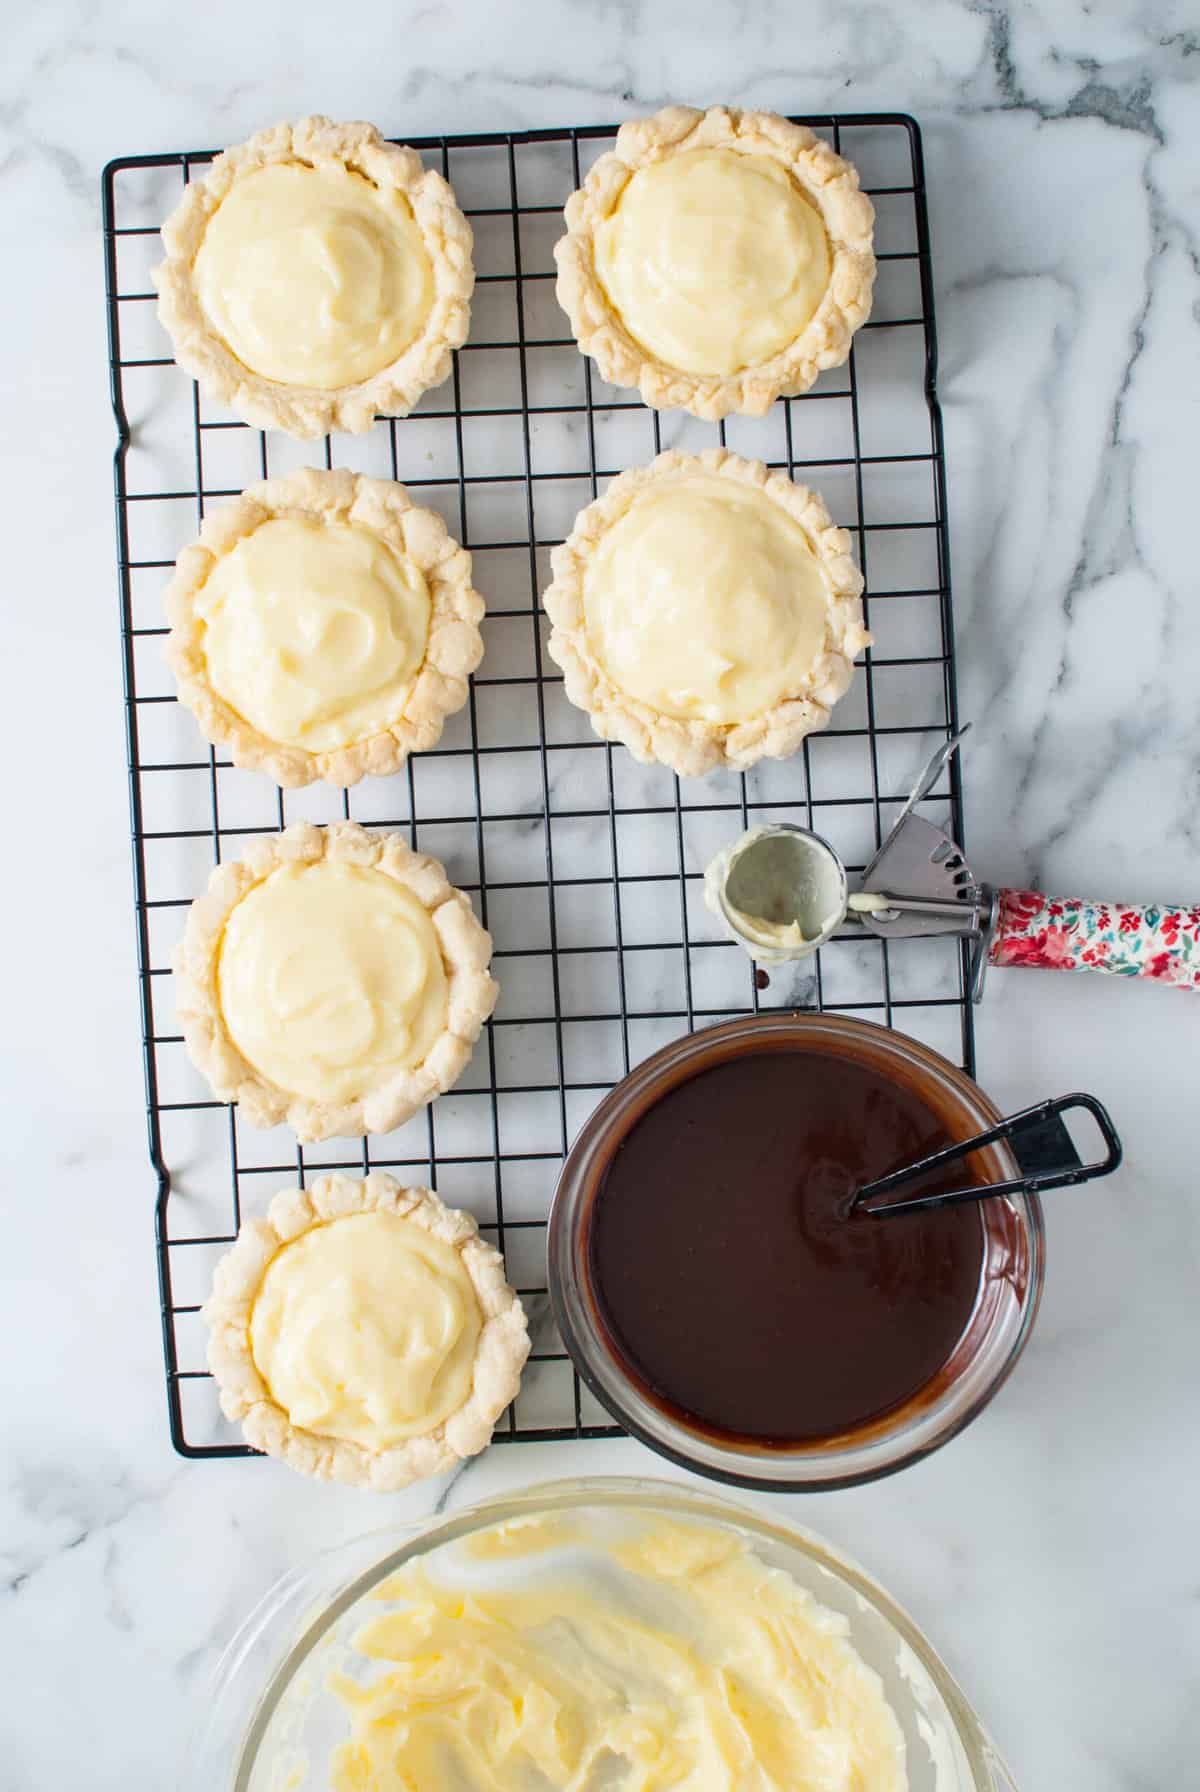 Cookie shells filled with pastry cream on a wire rack next to a bowl of chocolate glaze.